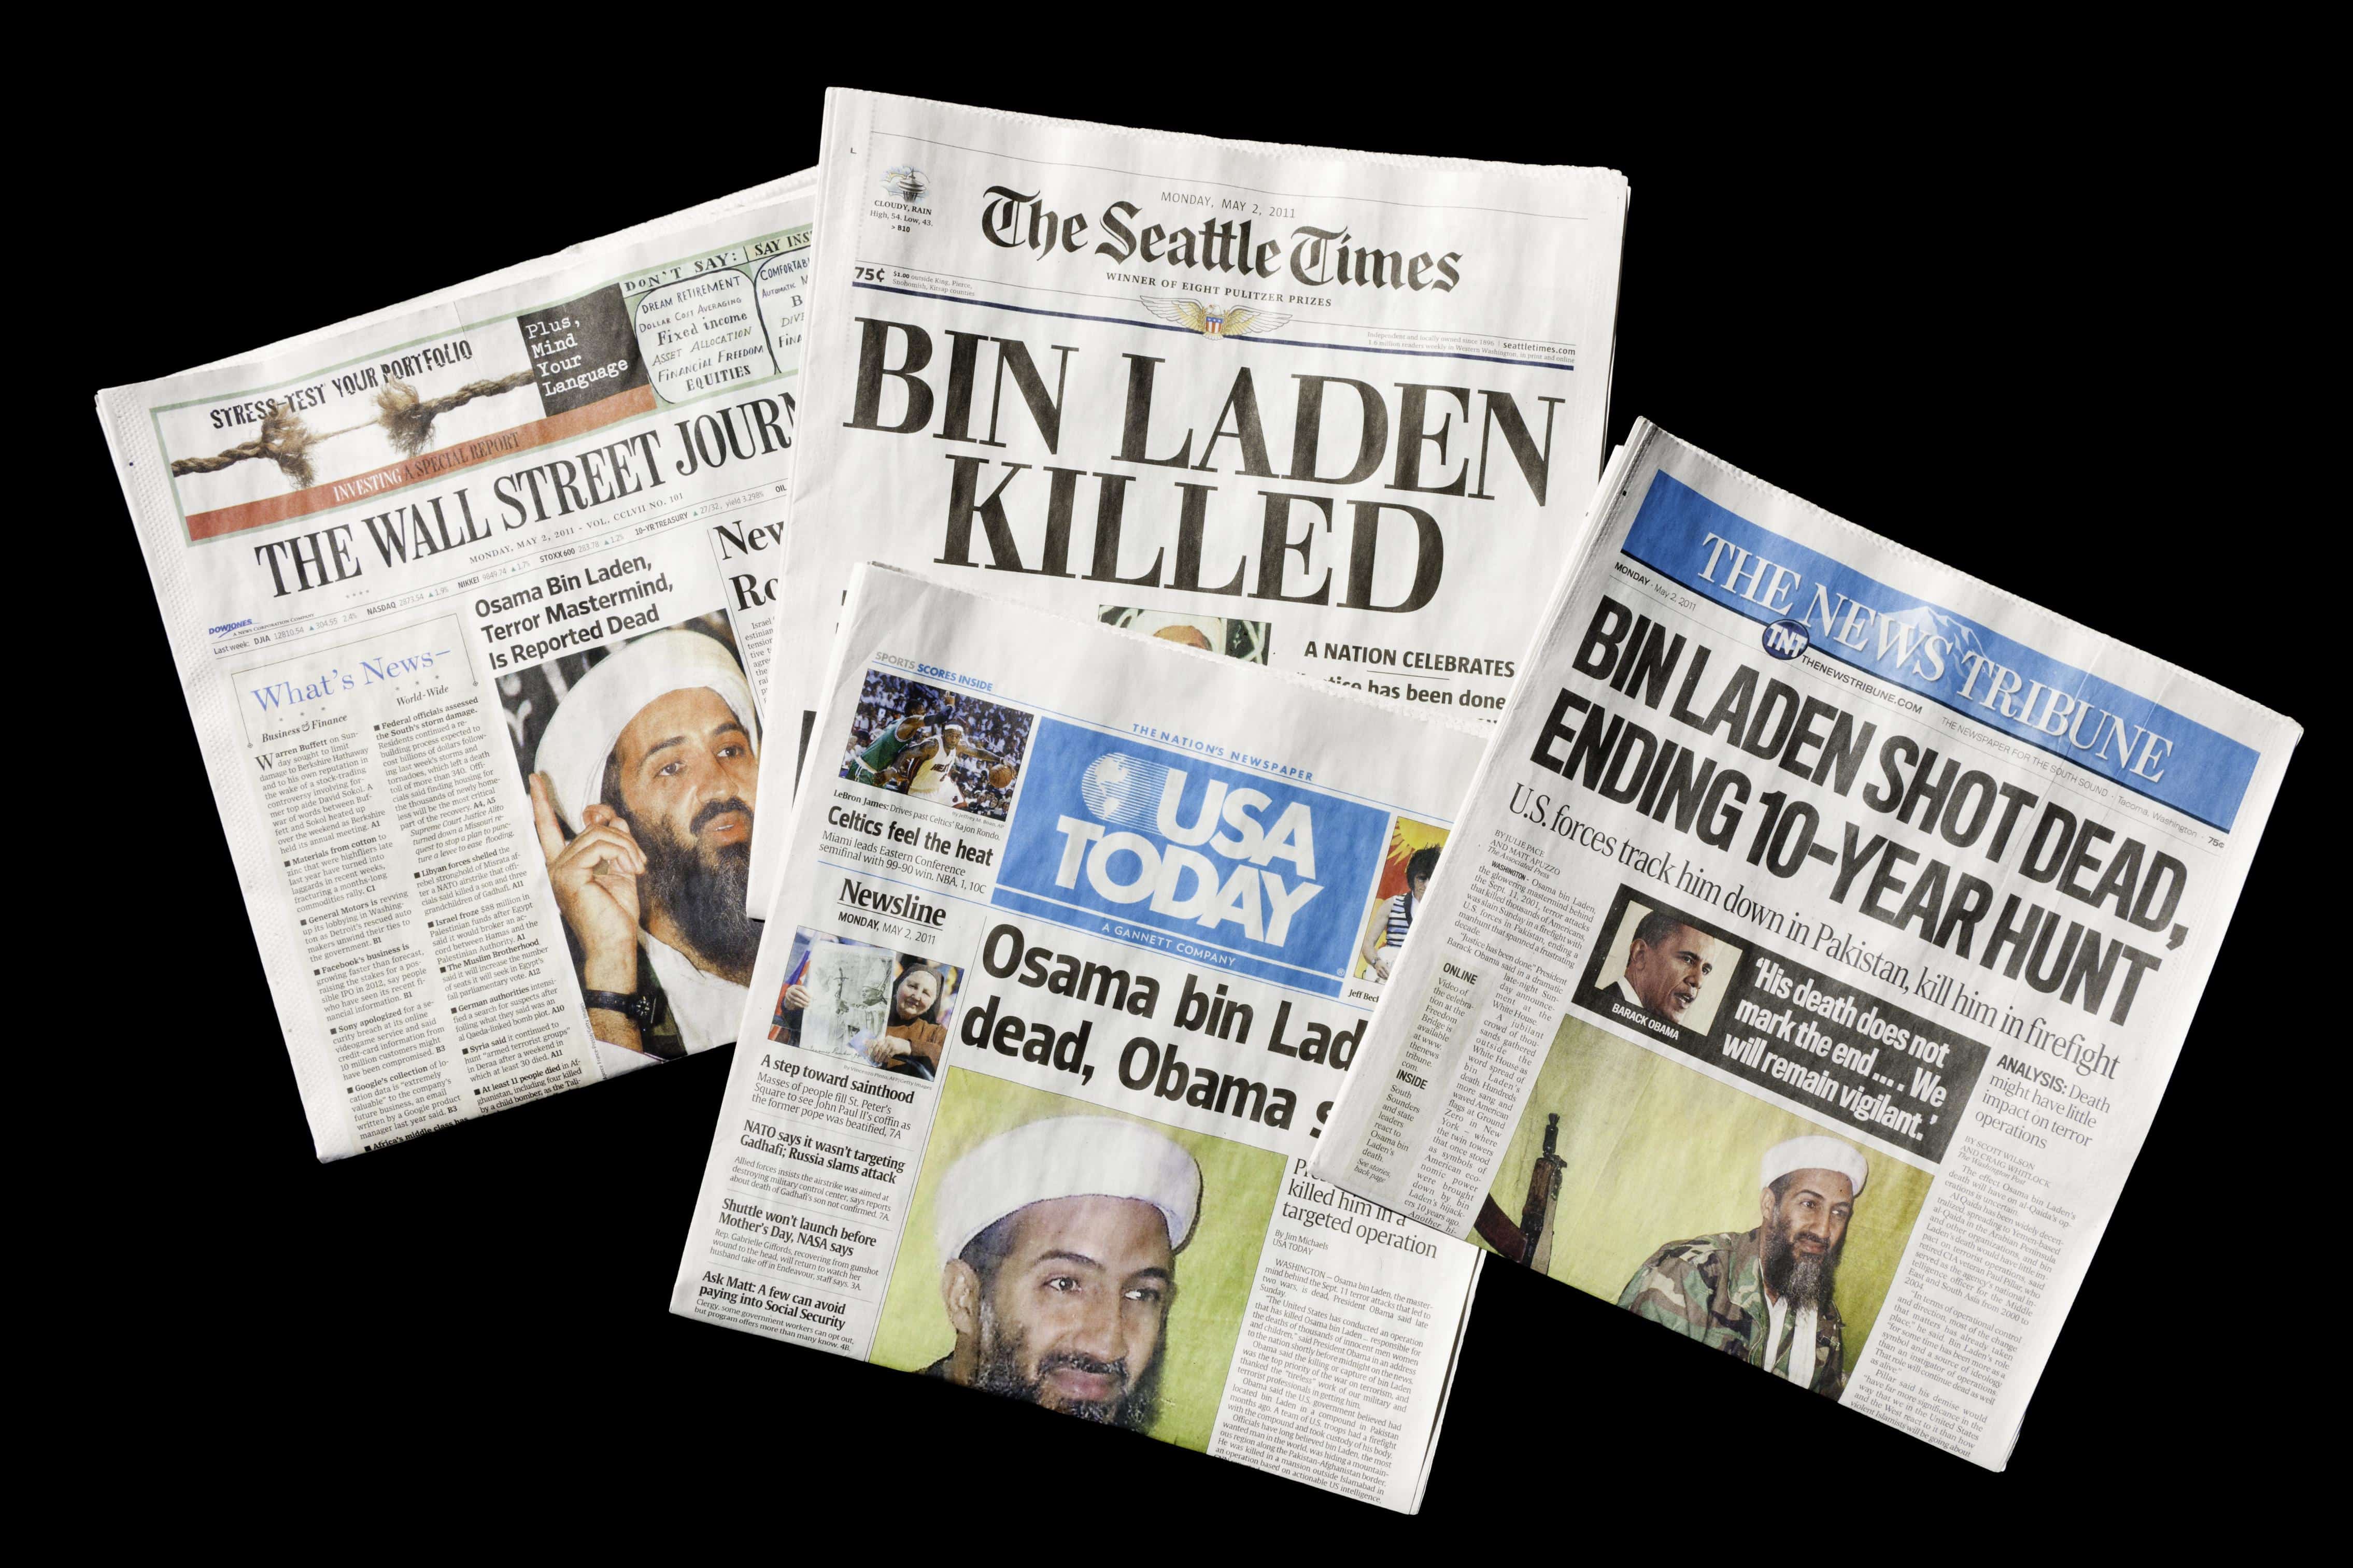 SEATTLE, WA - MAY 02: The Seattle Times and other U.S. newspapers report the death of Osama bin Laden on May 02, 2011. Bin Laden claimed responsibility for the September 11, 2001 attacks on the U.S.